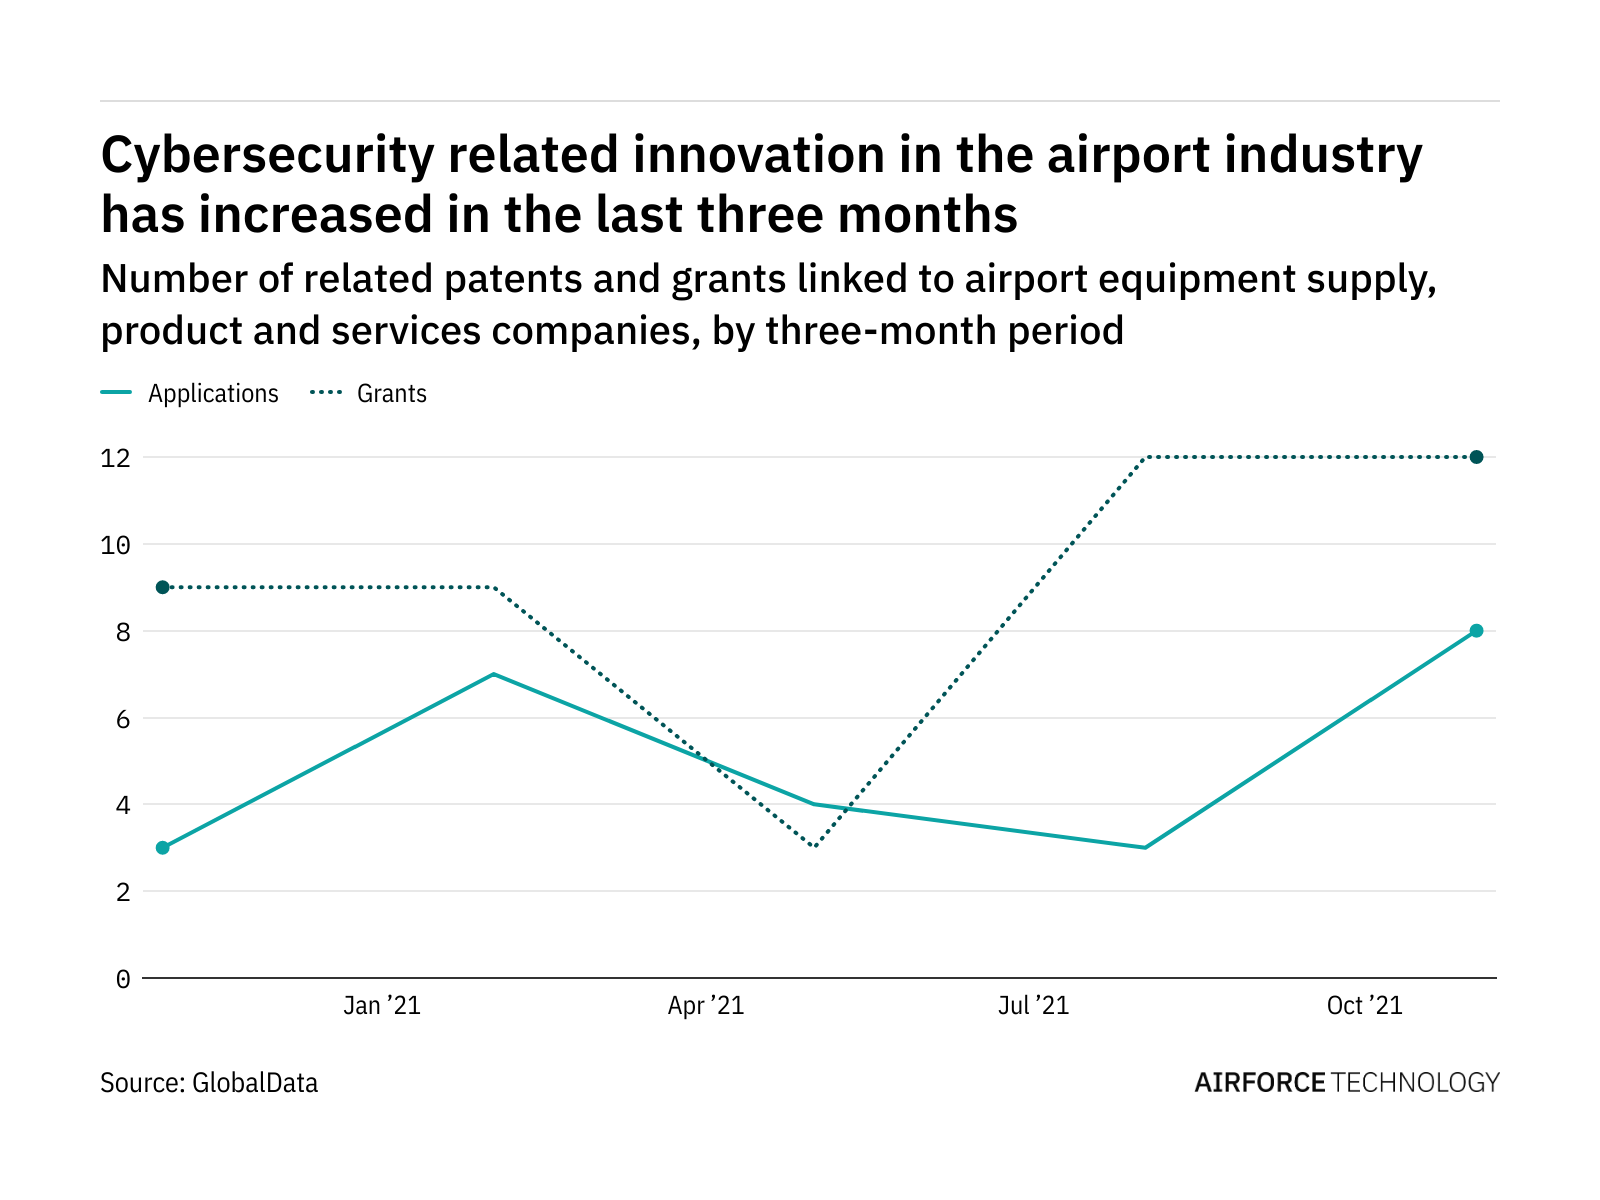 Airport industry companies are increasingly innovating in cybersecurity